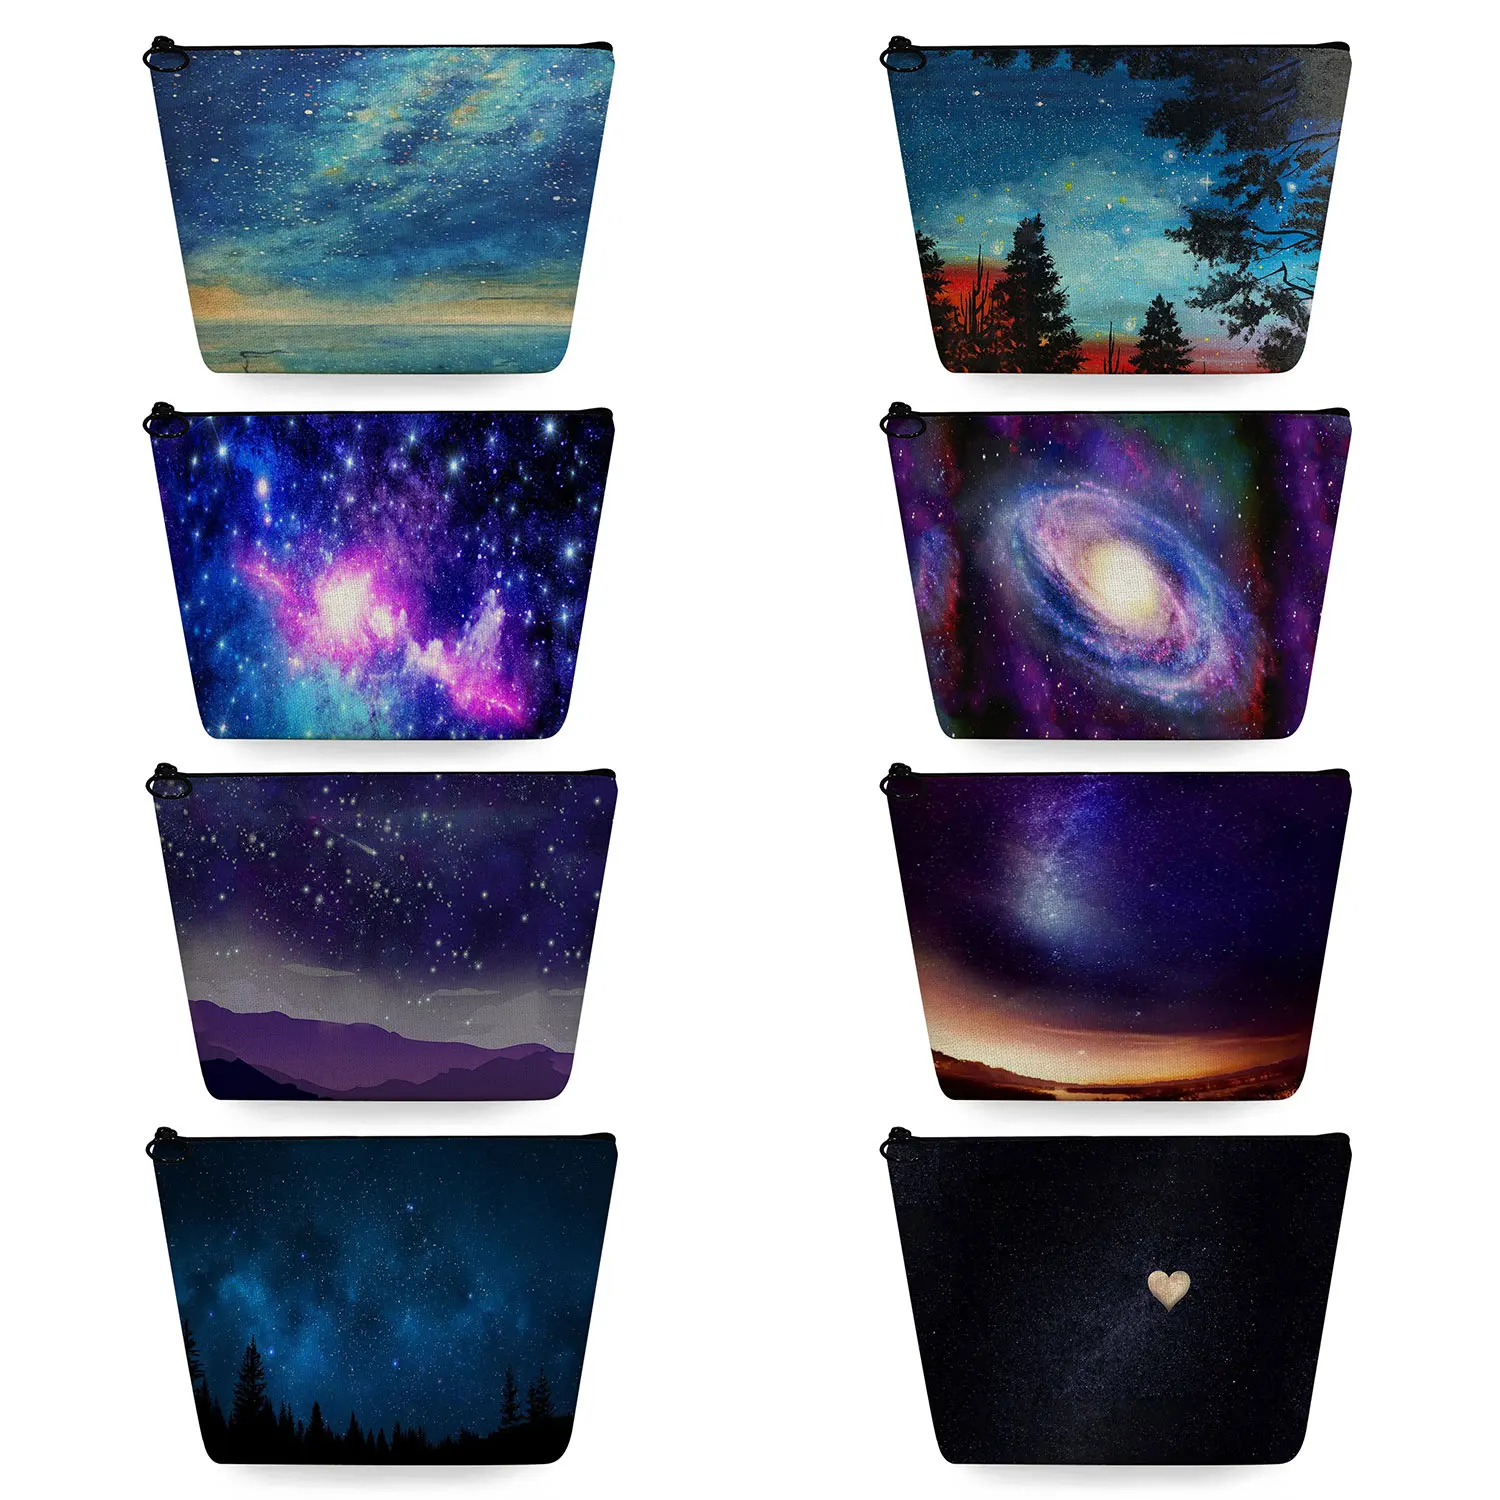 

Beautiful Landscape Women Cosmetic Bag Casual High Quality Makeup Organizer Portable Travel Toiletry Bag Pretty Starry Sky Print